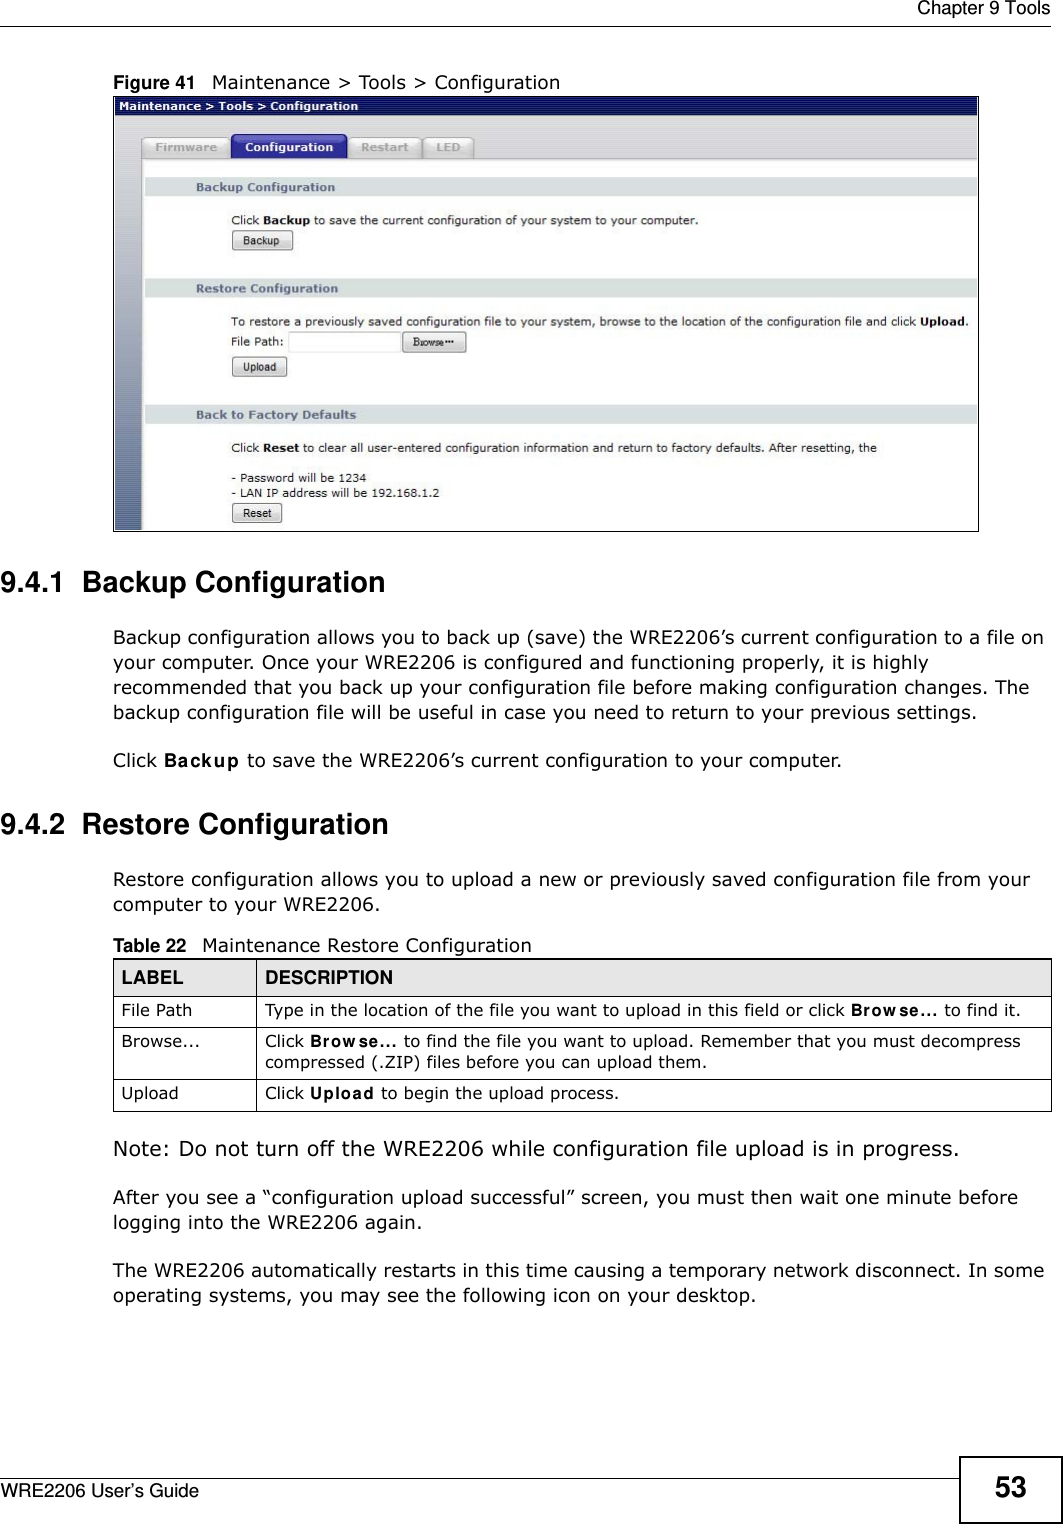  Chapter 9 ToolsWRE2206 User’s Guide 53Figure 41   Maintenance &gt; Tools &gt; Configuration 9.4.1  Backup ConfigurationBackup configuration allows you to back up (save) the WRE2206’s current configuration to a file on your computer. Once your WRE2206 is configured and functioning properly, it is highly recommended that you back up your configuration file before making configuration changes. The backup configuration file will be useful in case you need to return to your previous settings. Click Backup to save the WRE2206’s current configuration to your computer.9.4.2  Restore ConfigurationRestore configuration allows you to upload a new or previously saved configuration file from your computer to your WRE2206.Note: Do not turn off the WRE2206 while configuration file upload is in progress.After you see a “configuration upload successful” screen, you must then wait one minute before logging into the WRE2206 again. The WRE2206 automatically restarts in this time causing a temporary network disconnect. In some operating systems, you may see the following icon on your desktop.Table 22   Maintenance Restore ConfigurationLABEL DESCRIPTIONFile Path  Type in the location of the file you want to upload in this field or click Brow se... to find it.Browse...  Click Br ow se... to find the file you want to upload. Remember that you must decompress compressed (.ZIP) files before you can upload them. Upload  Click Uploa d to begin the upload process.